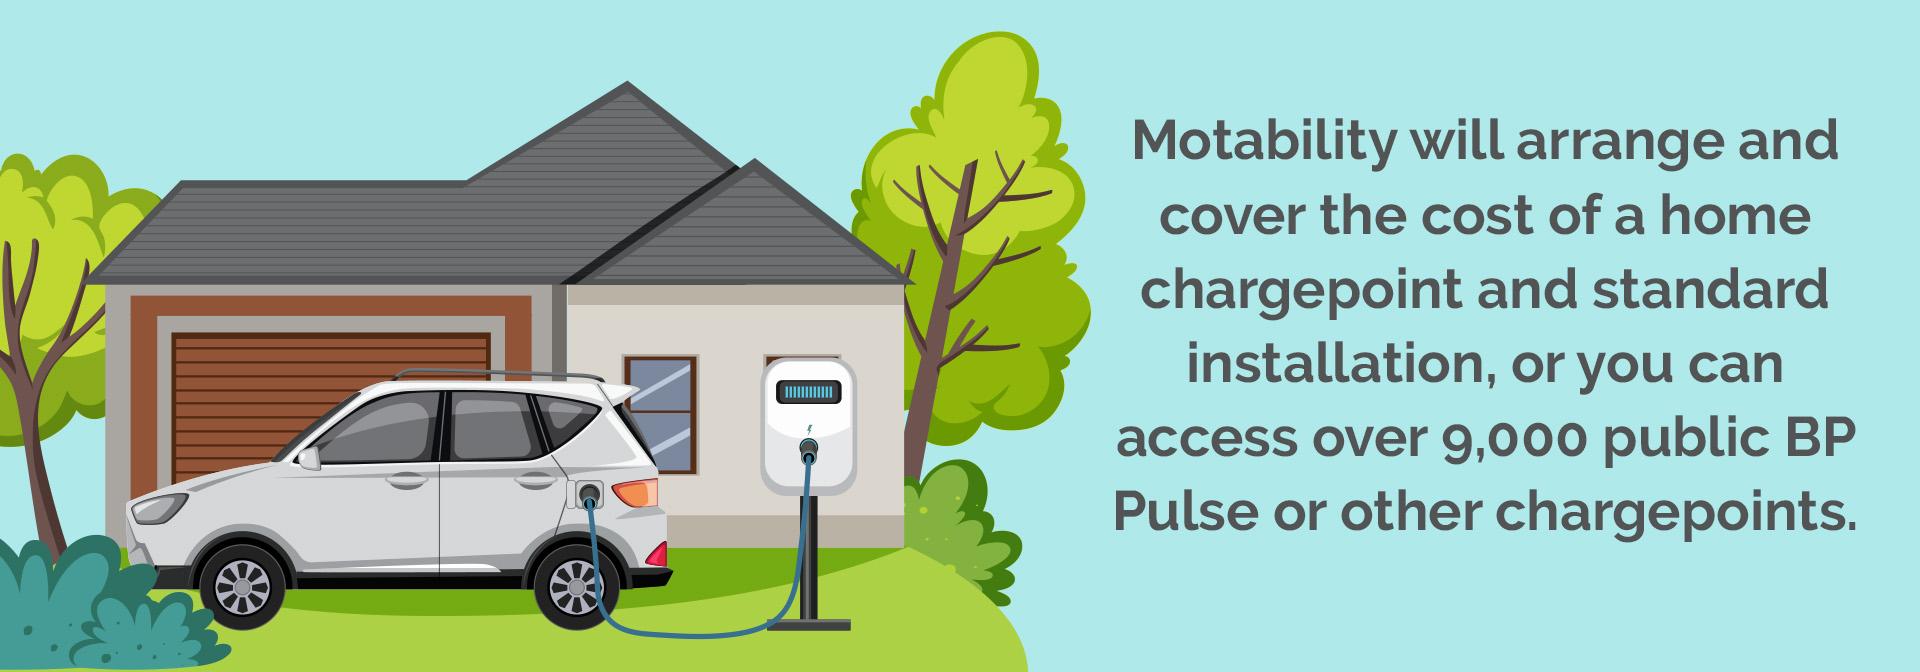 motability home chargepoint